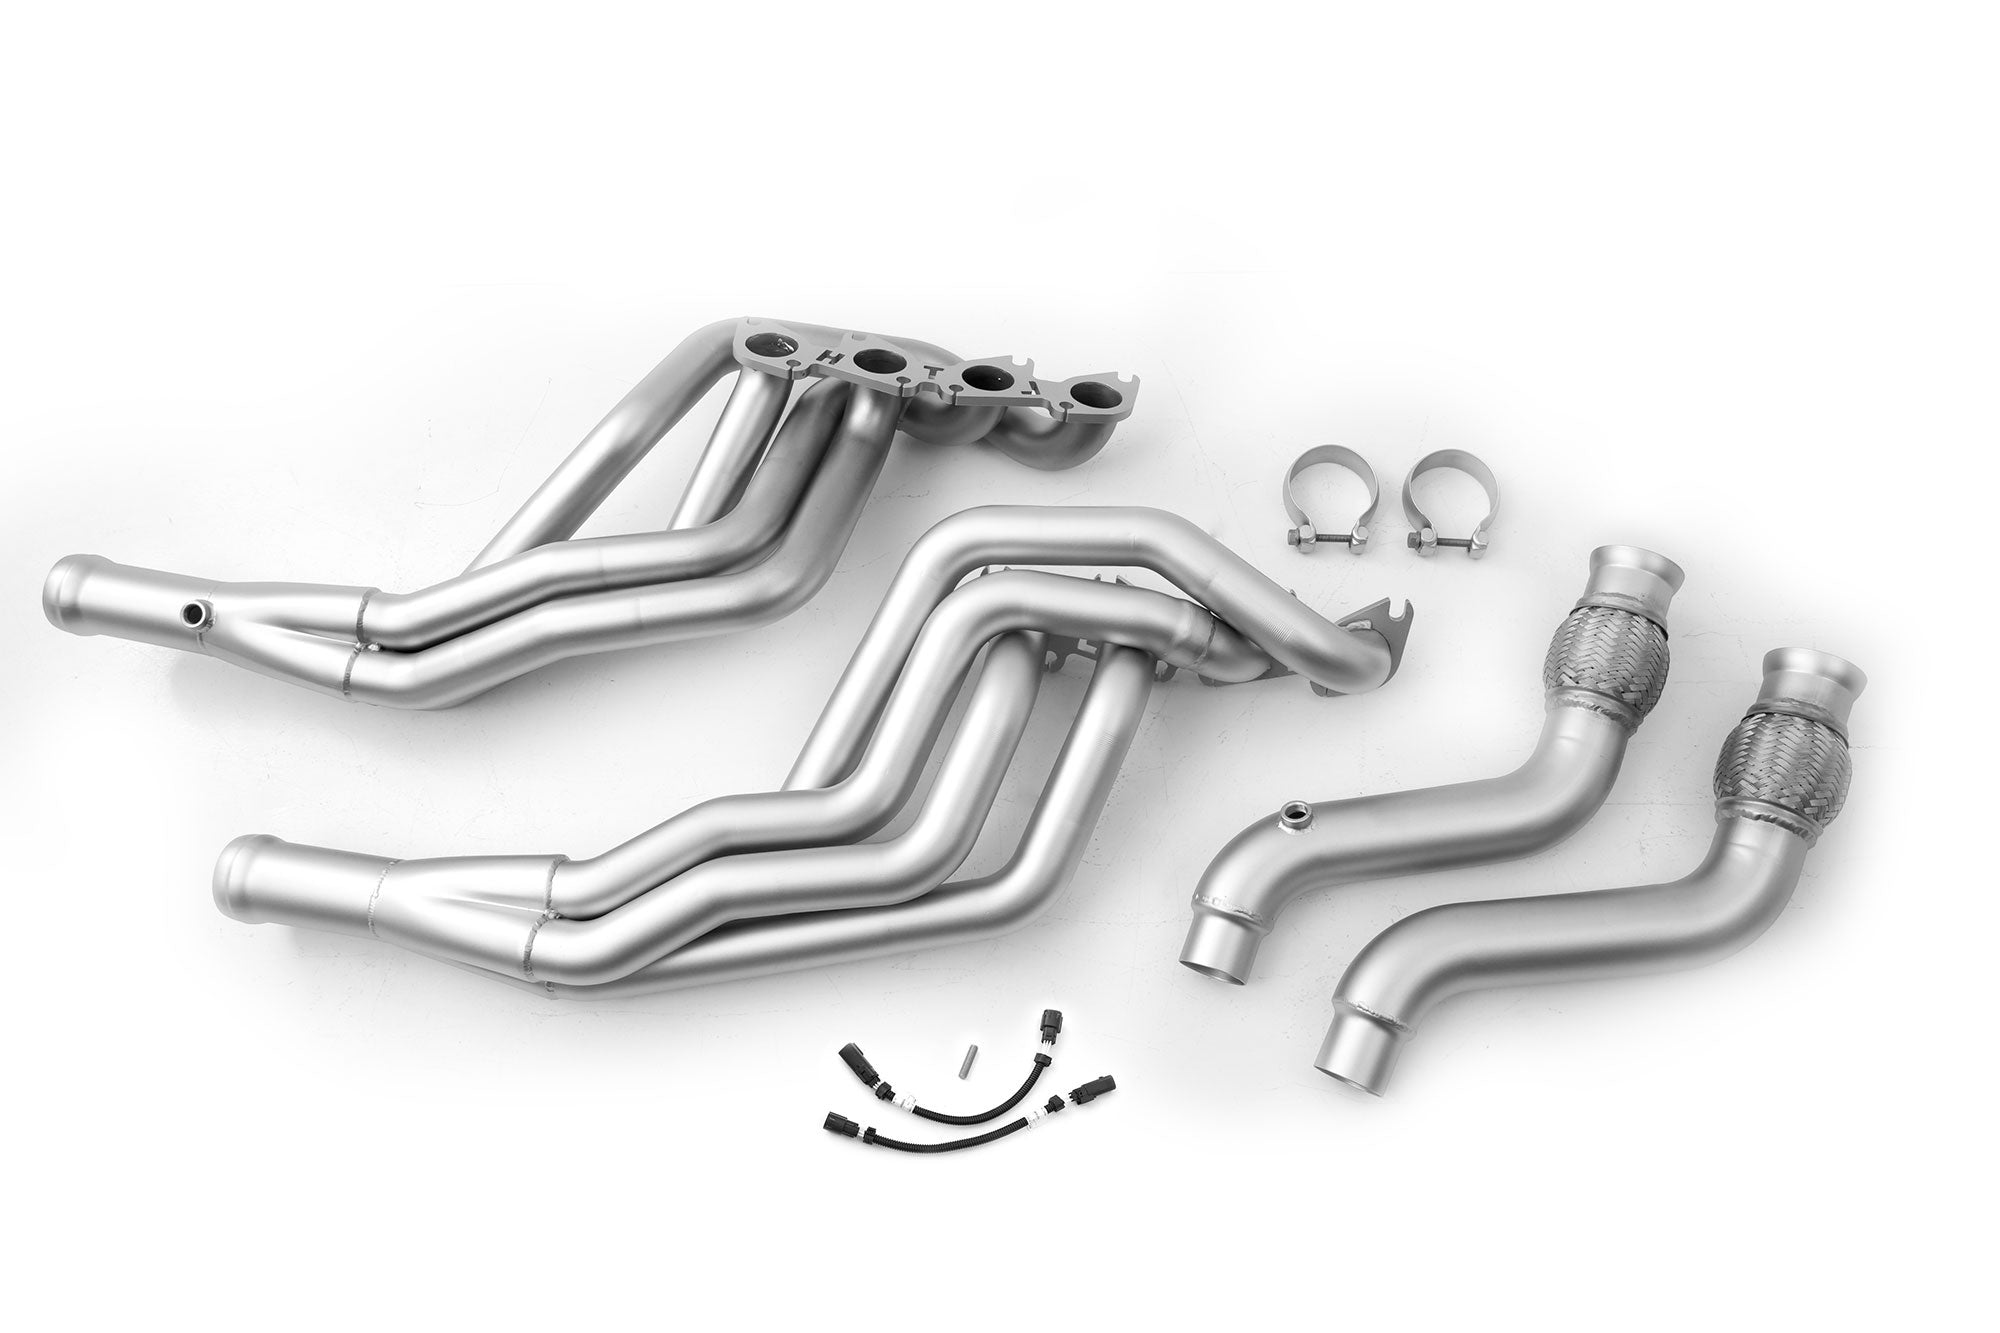 LTH S550 Mustang Tube Long Headers - Chat / Décat (15-20)